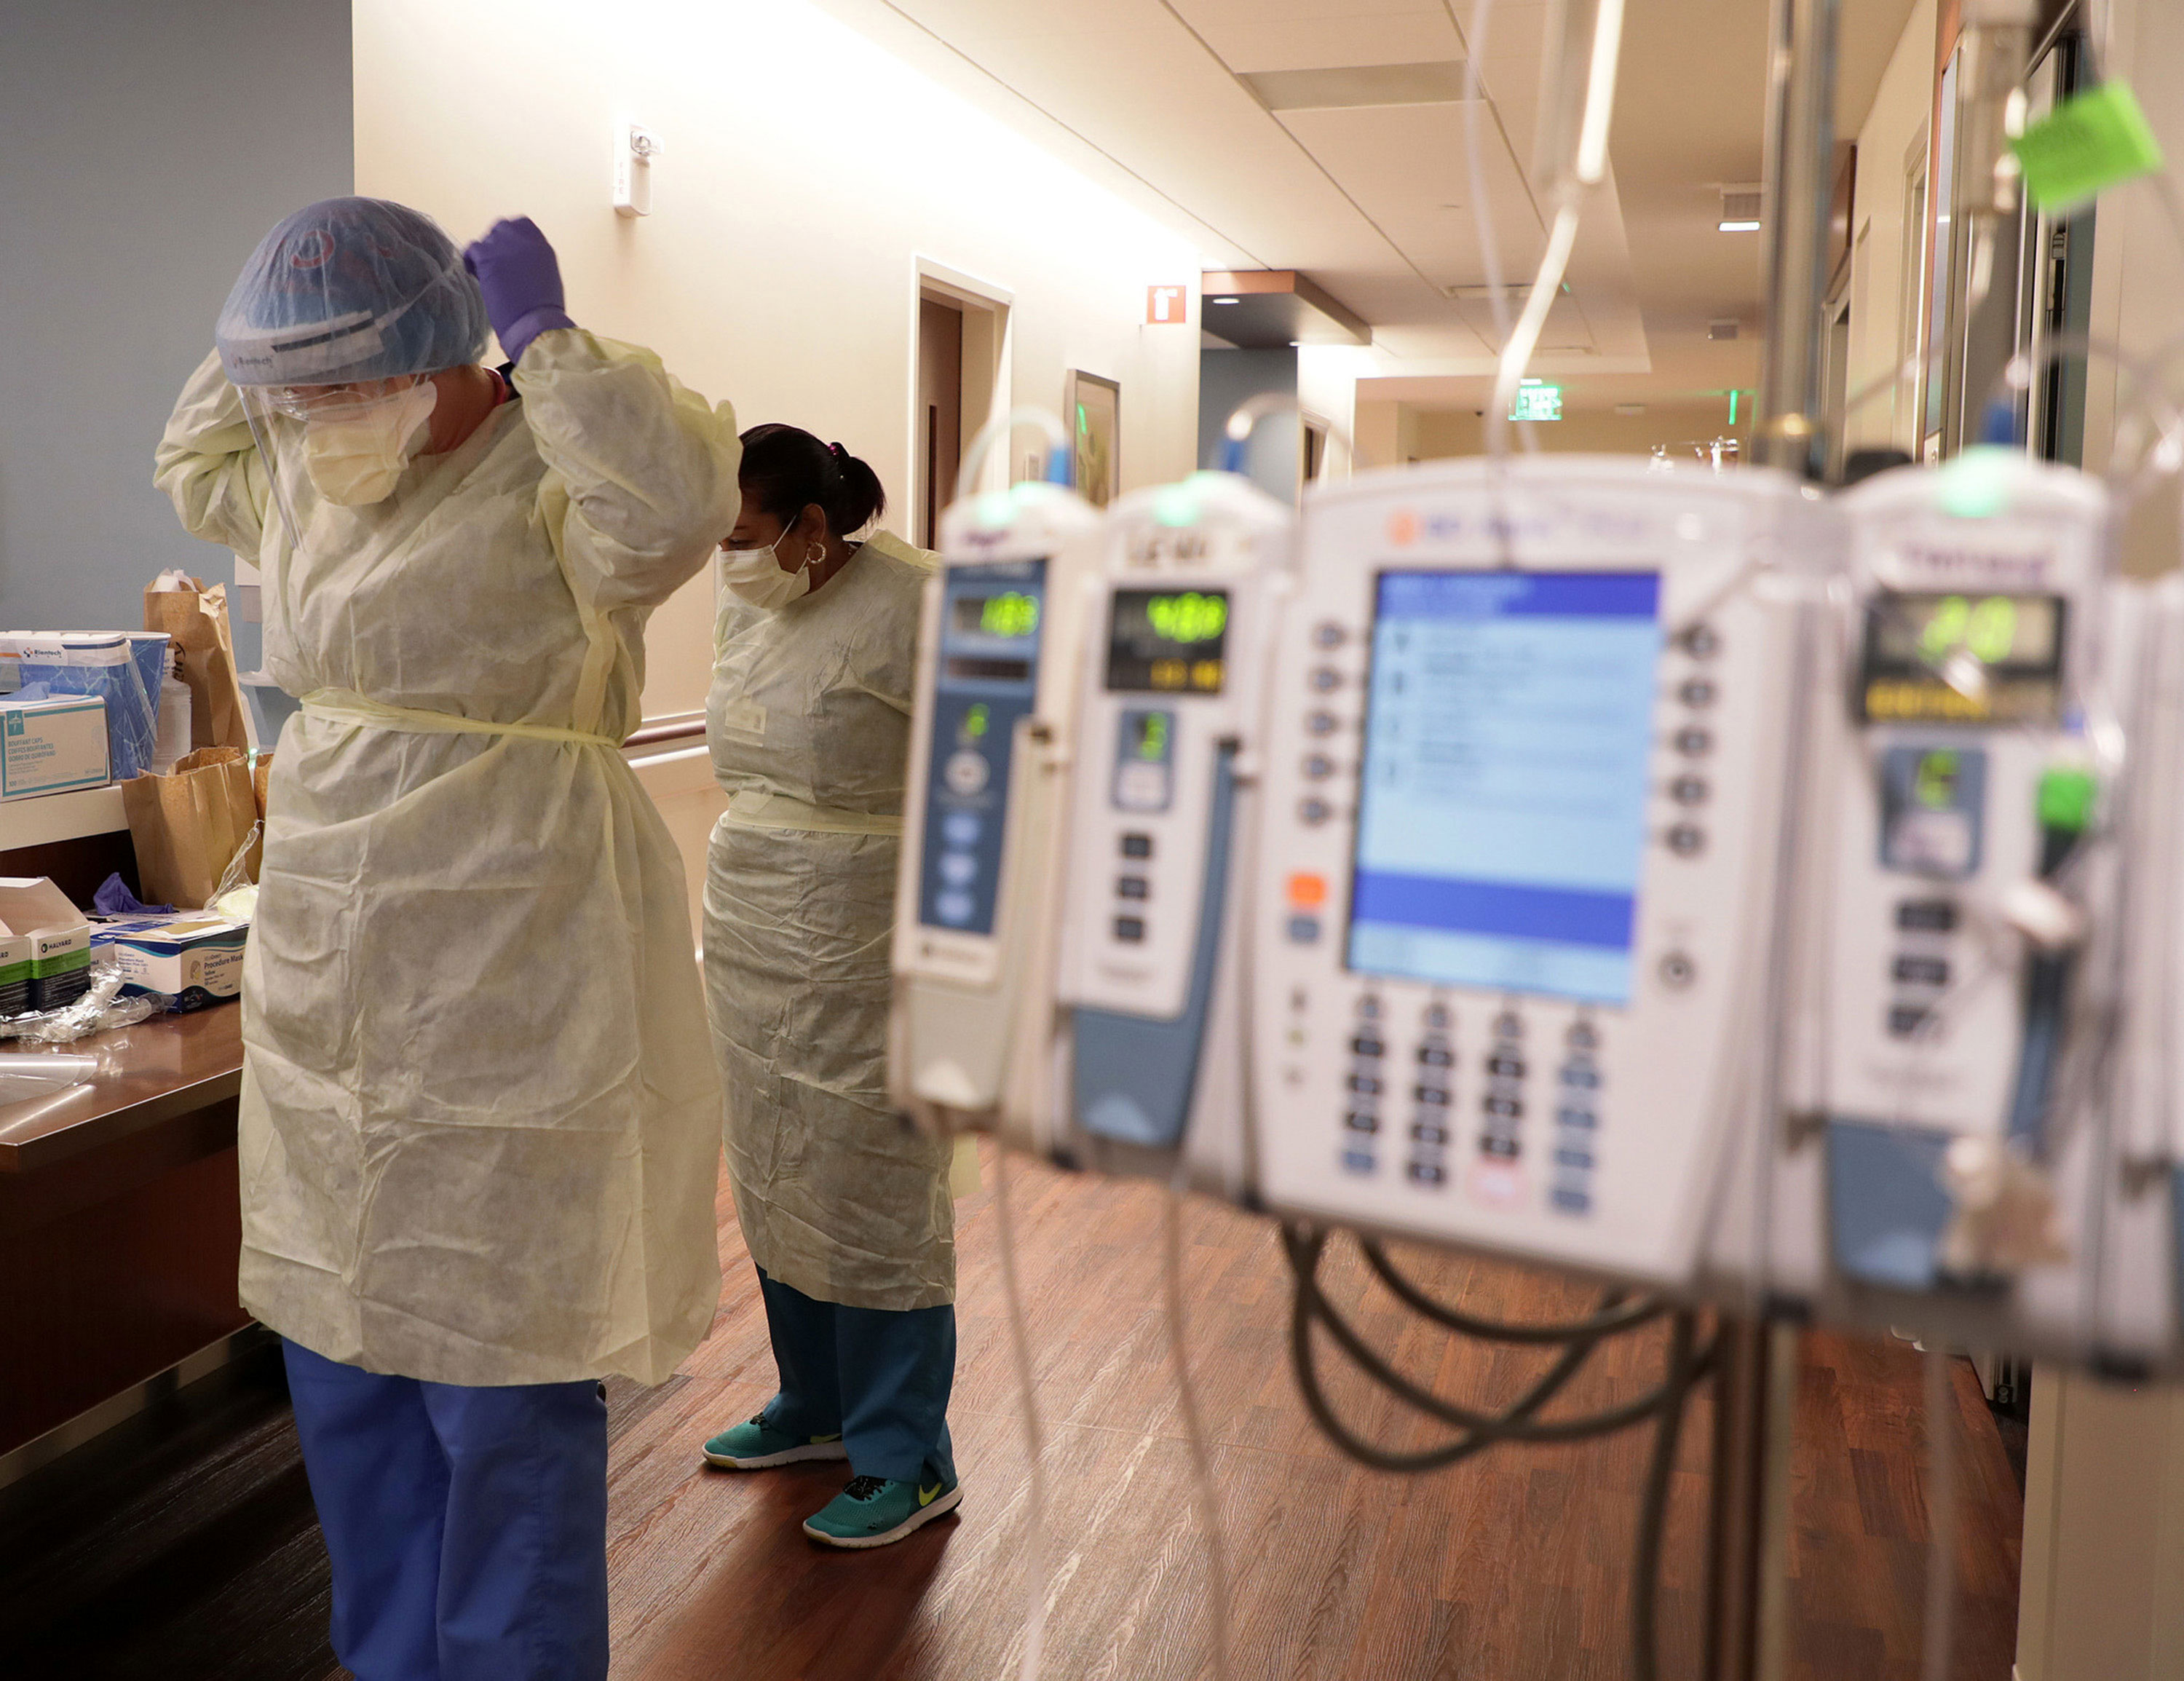 Healthcare workers put on PPE gear before entering a Covid-19 patient's room at Northwestern Medicine Lake Forest Hospital in Lake Forest, Illinois, on October 1.